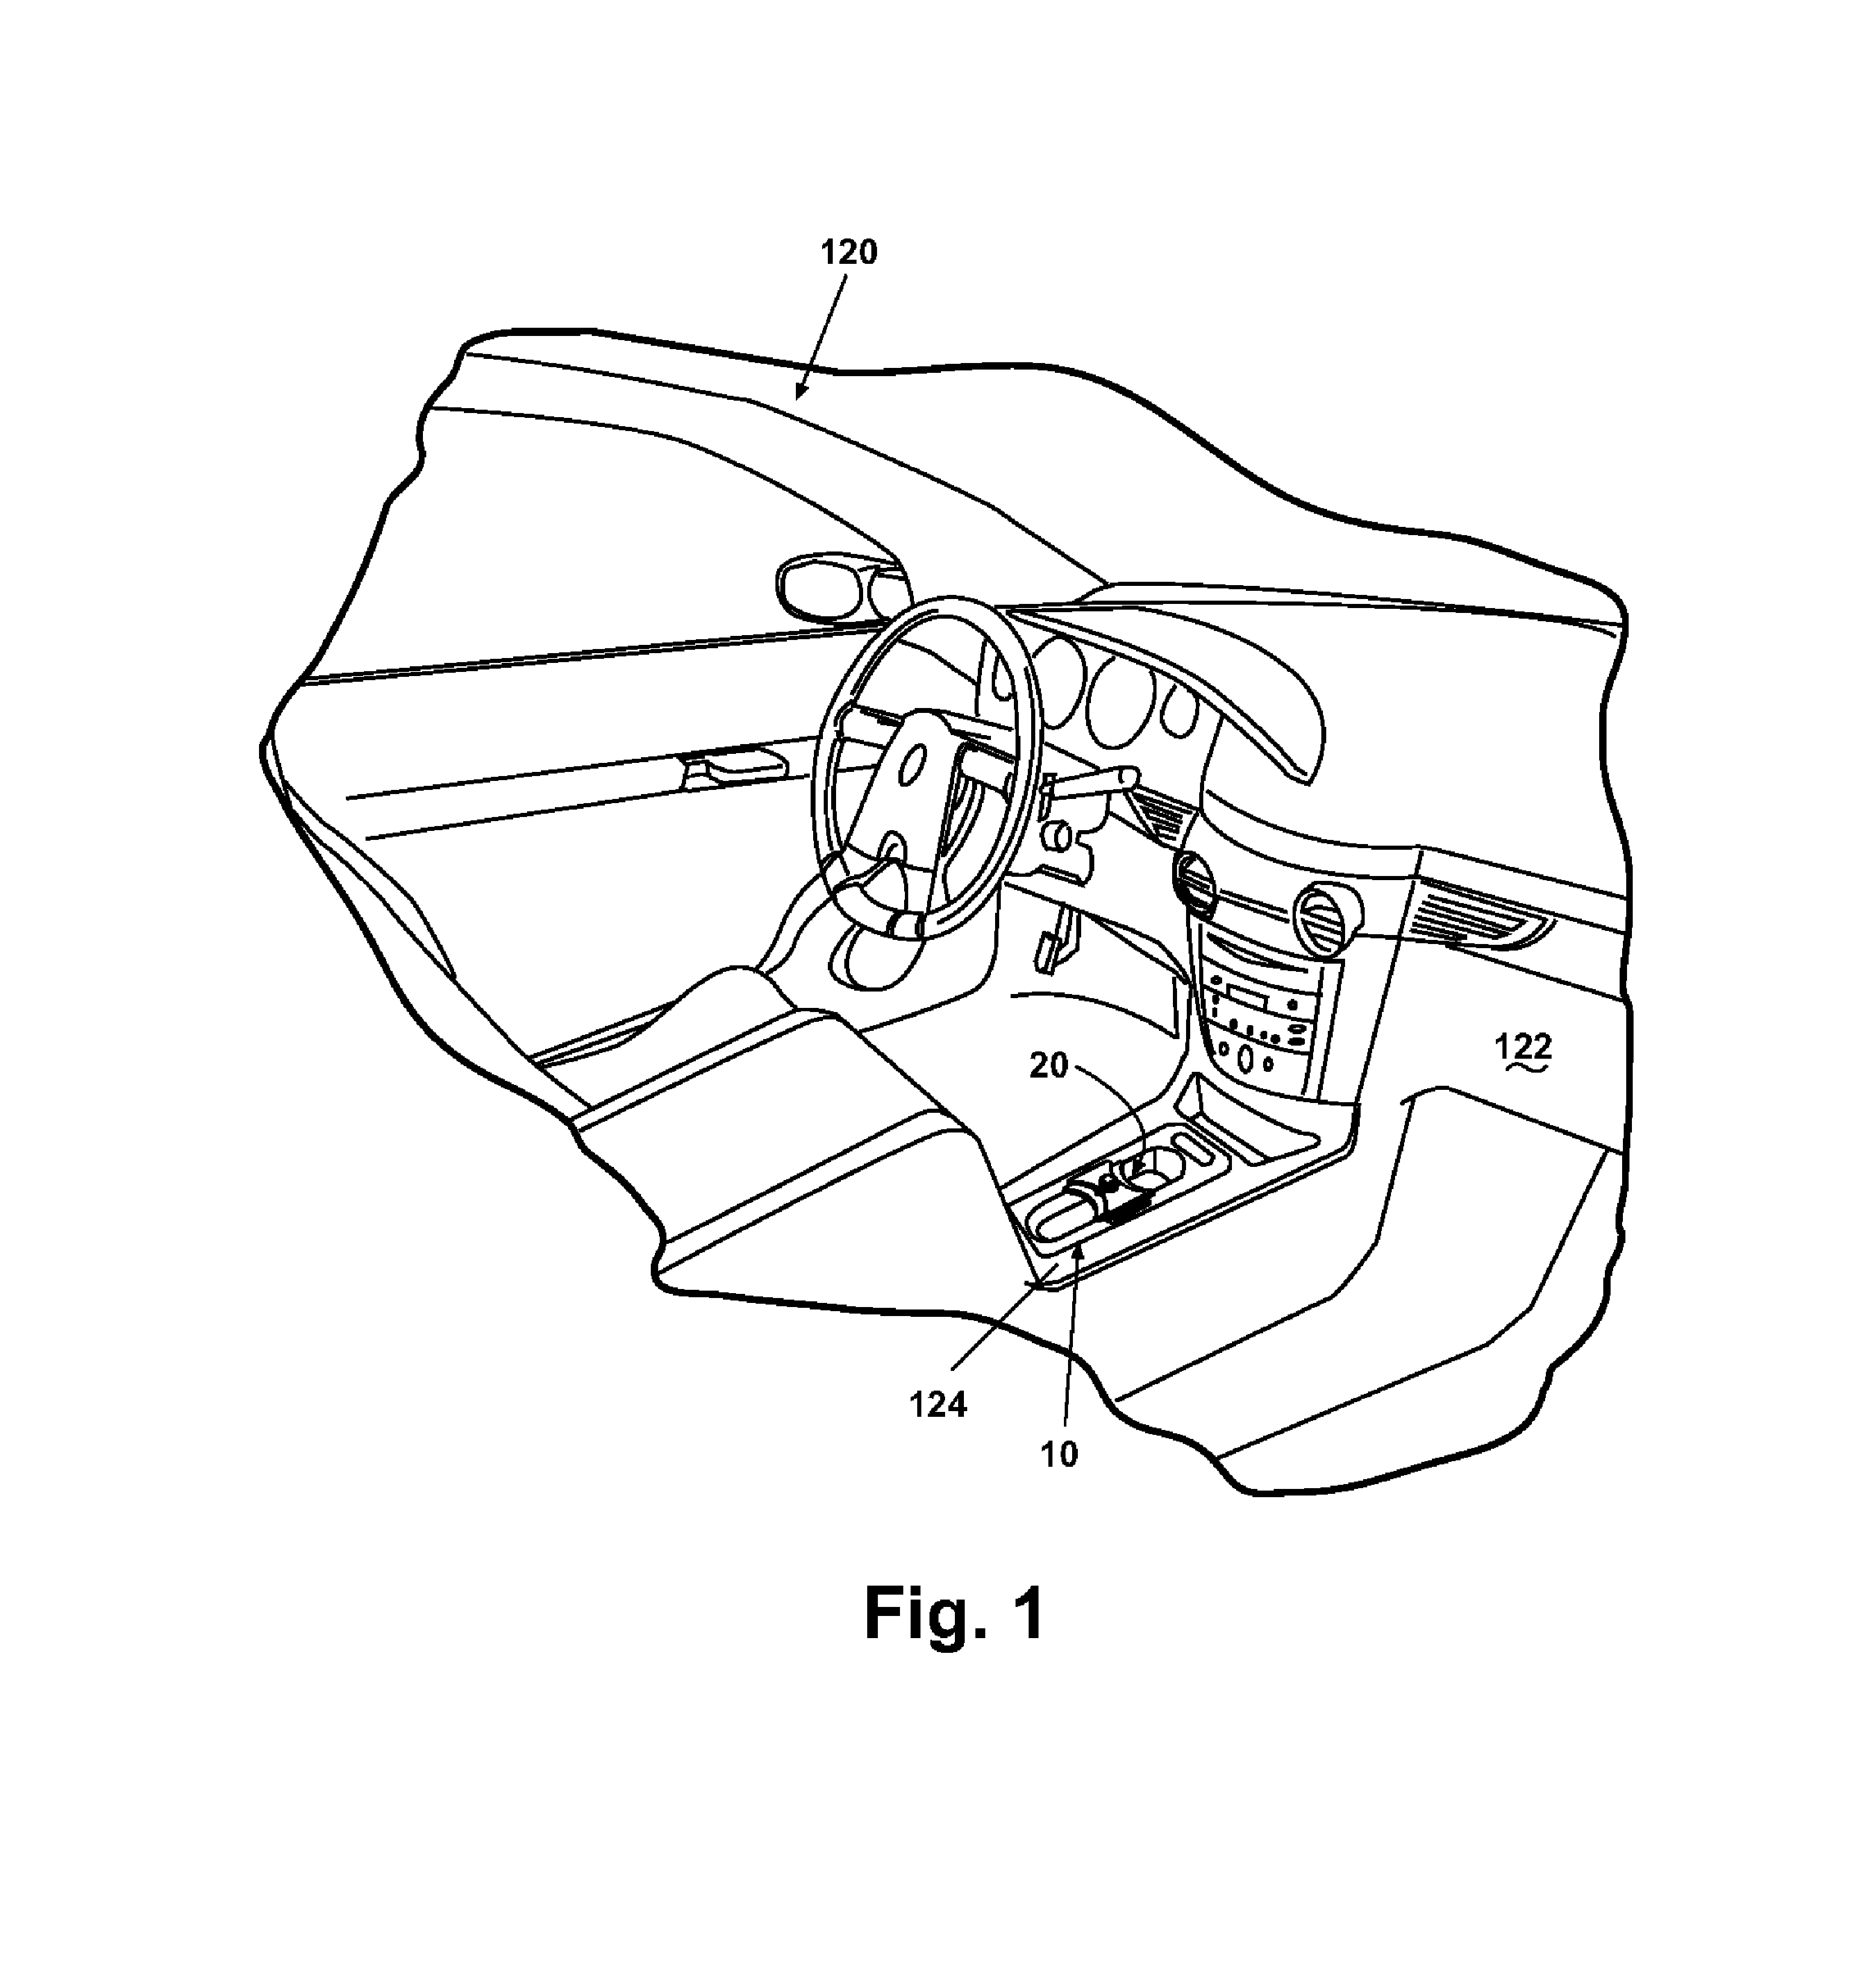 Multi-chamber vehicular beverage container holder with common actuator